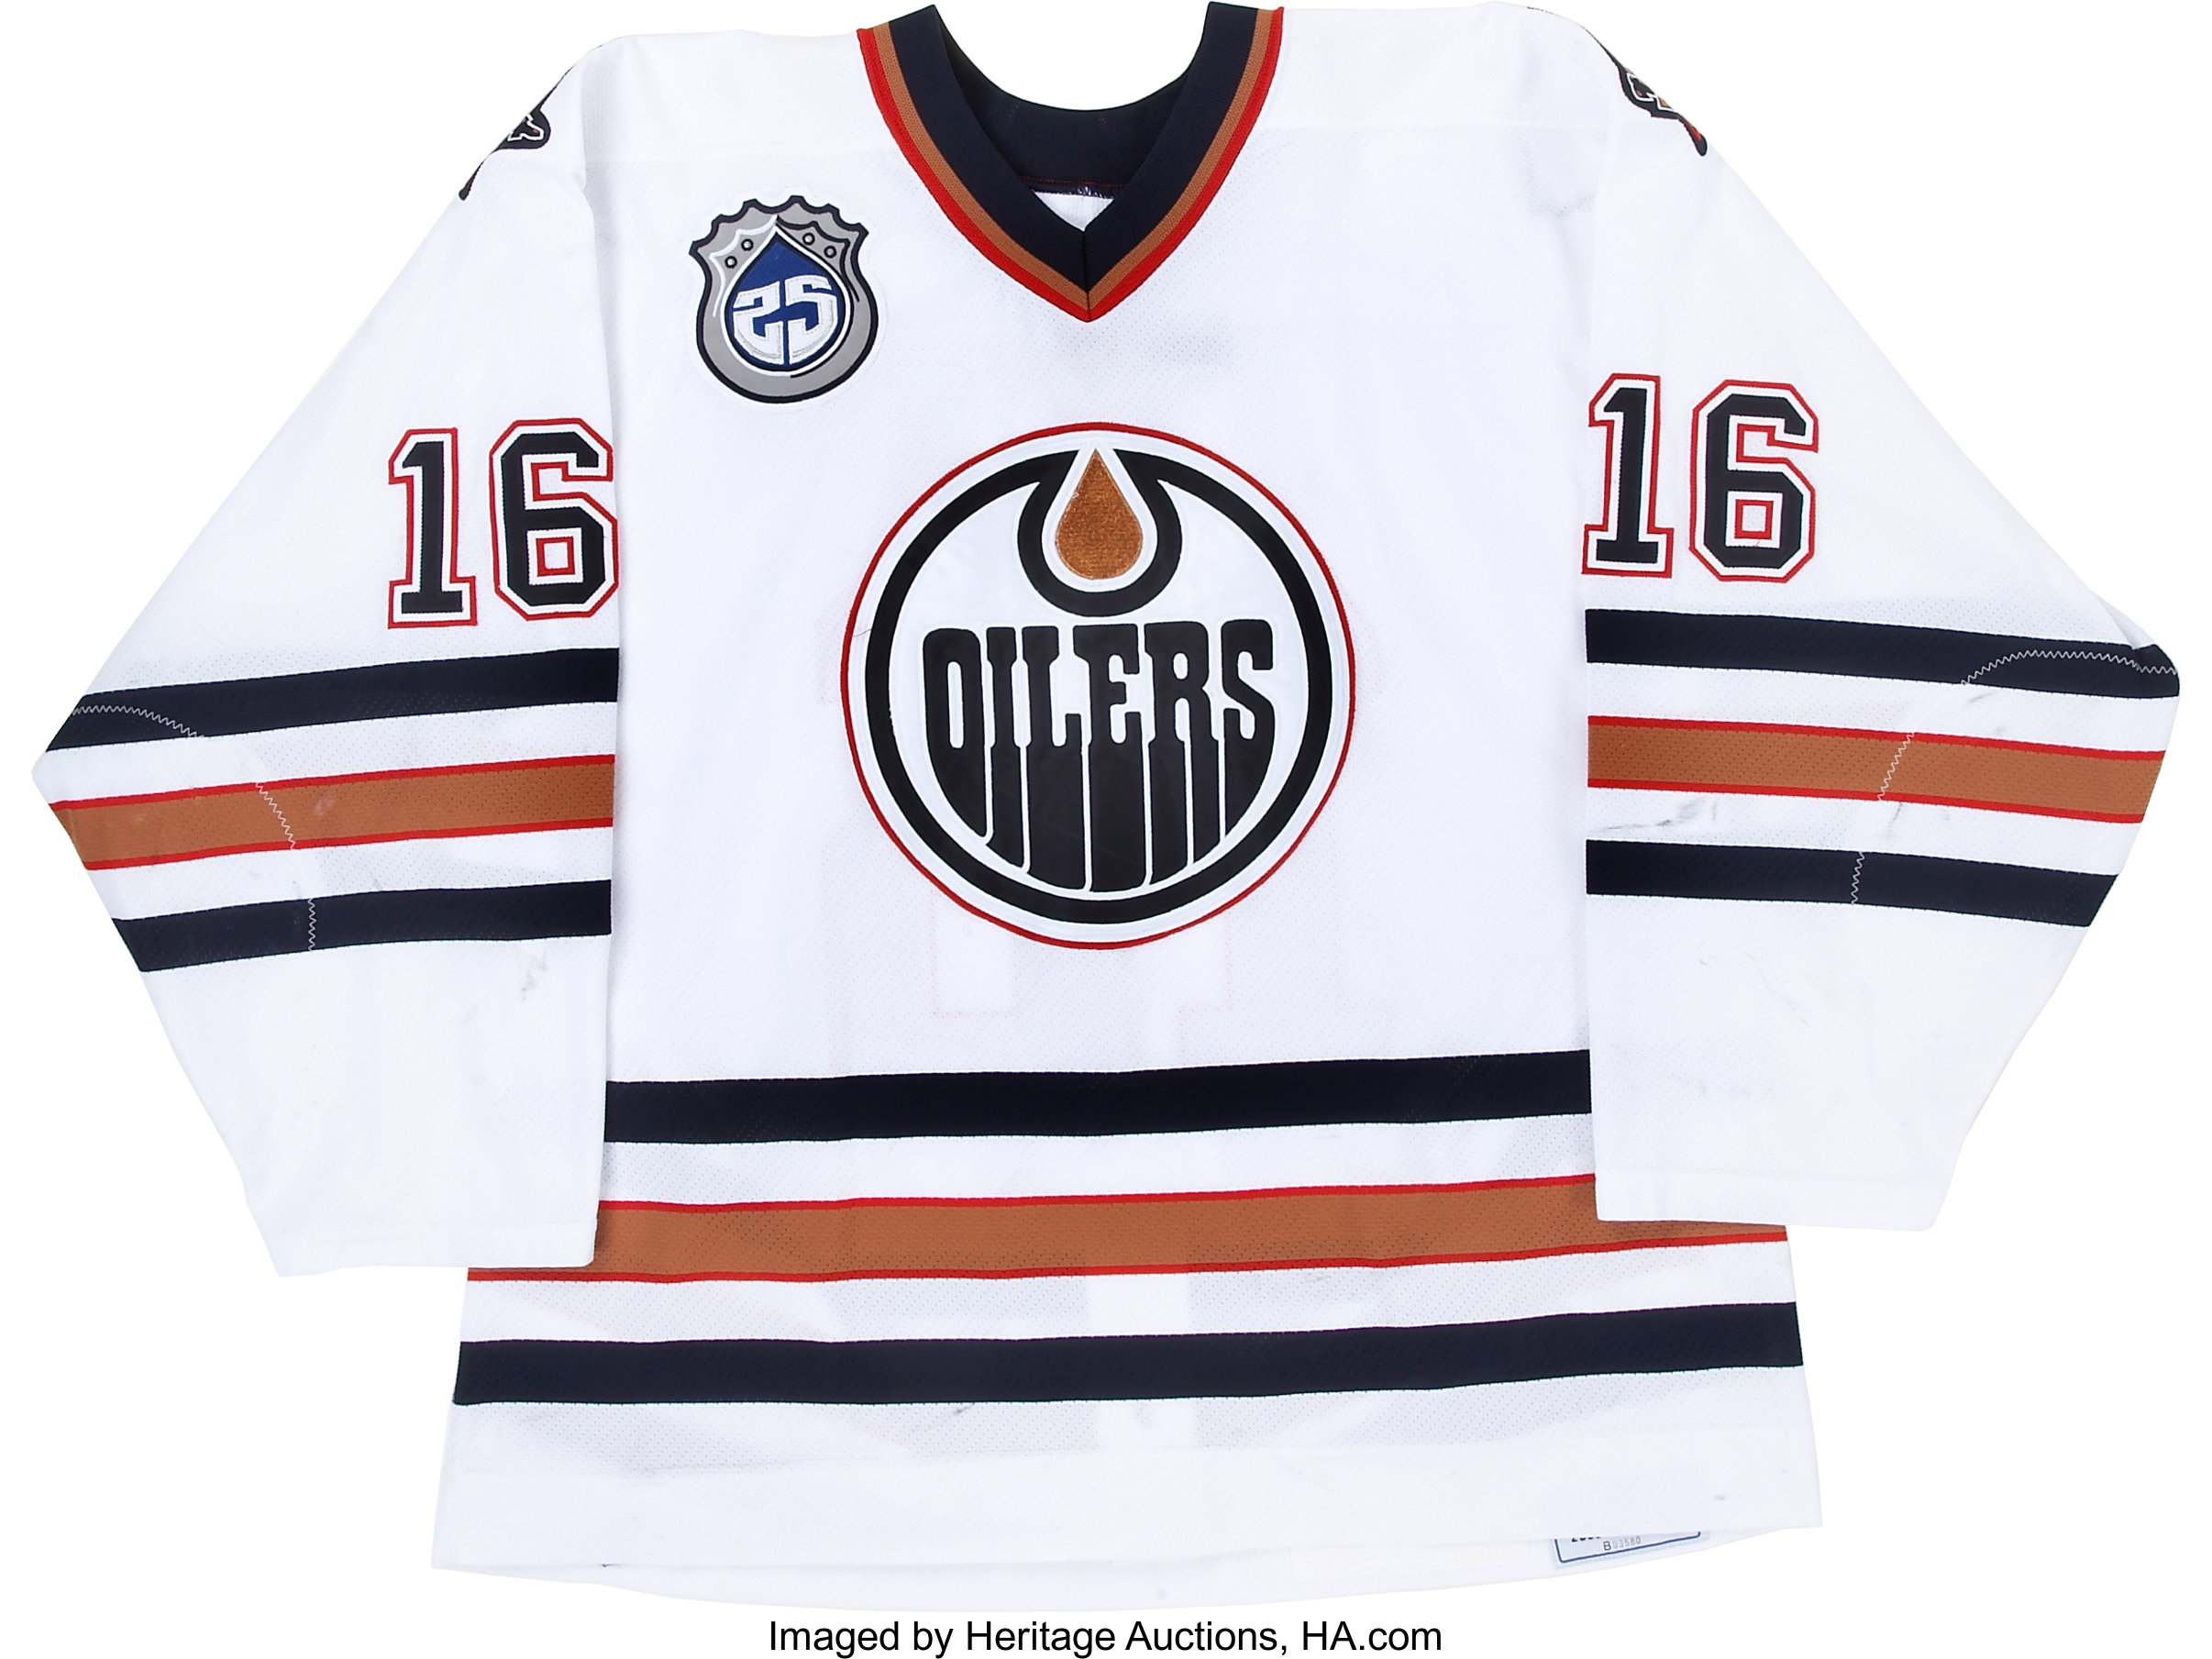 They were looking outside the box': Oilers' distinctive third jerseys still  stand out - The Athletic